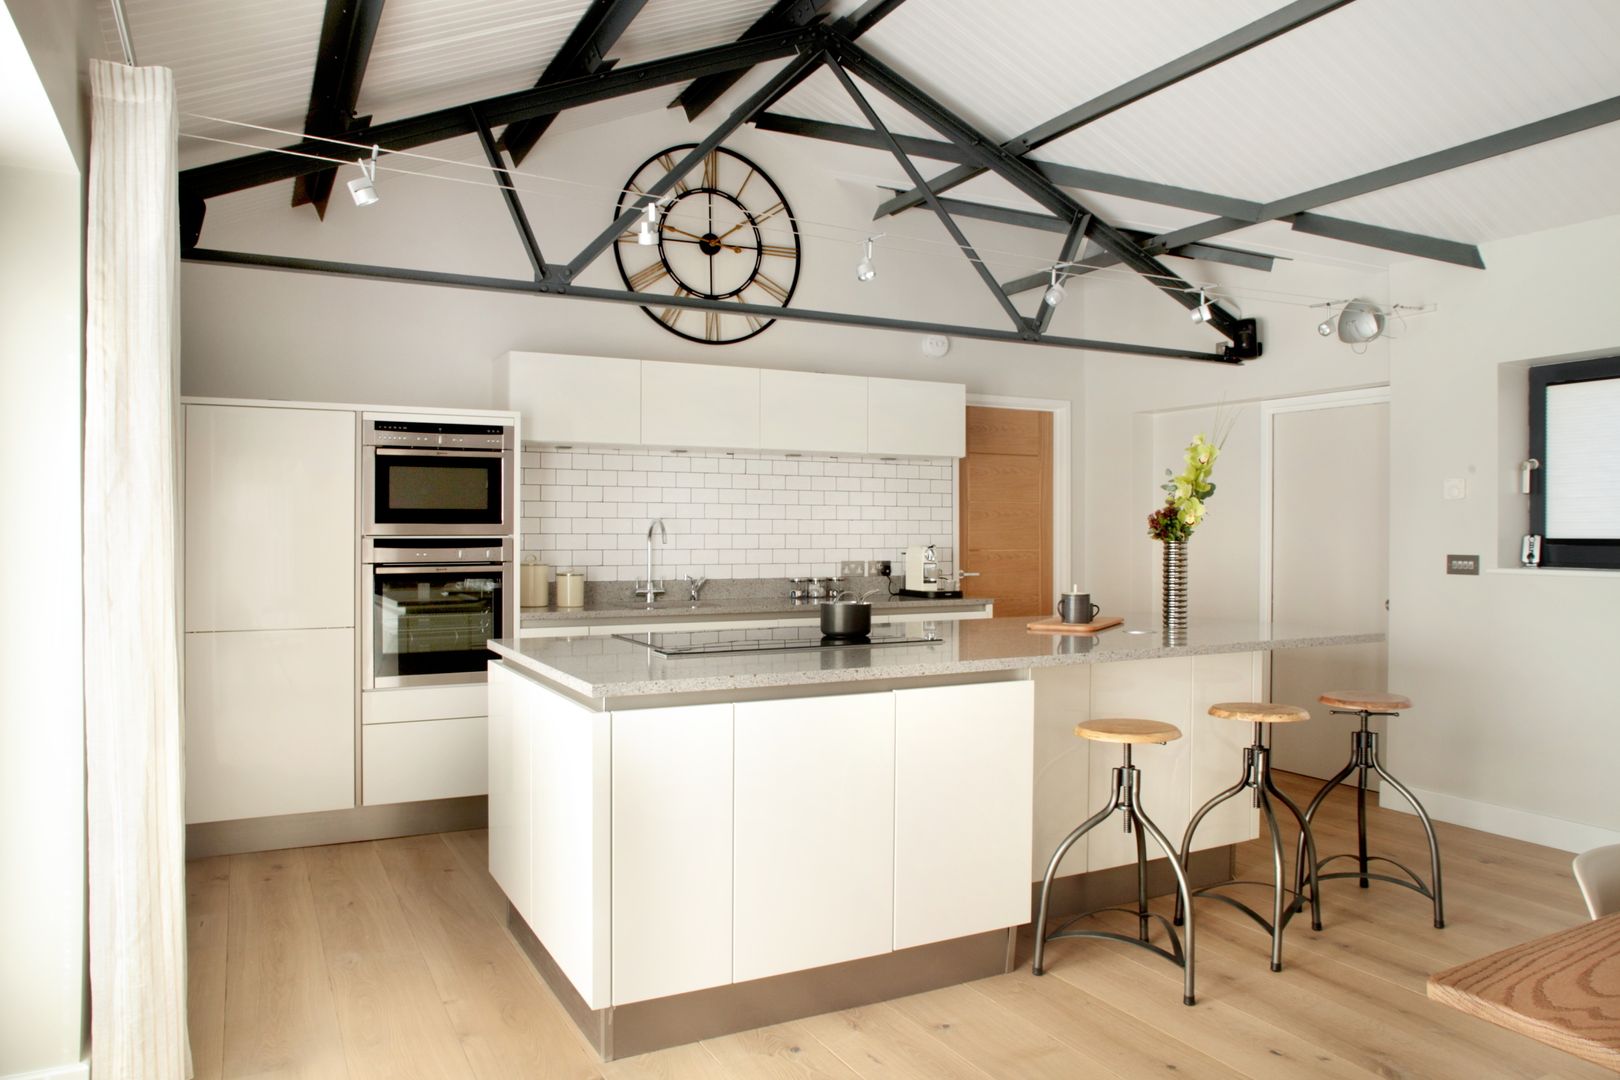 The Cow Shed Barn Conversion Kitchen in-toto Kitchens Design Studio Marlow クラシックデザインの キッチン